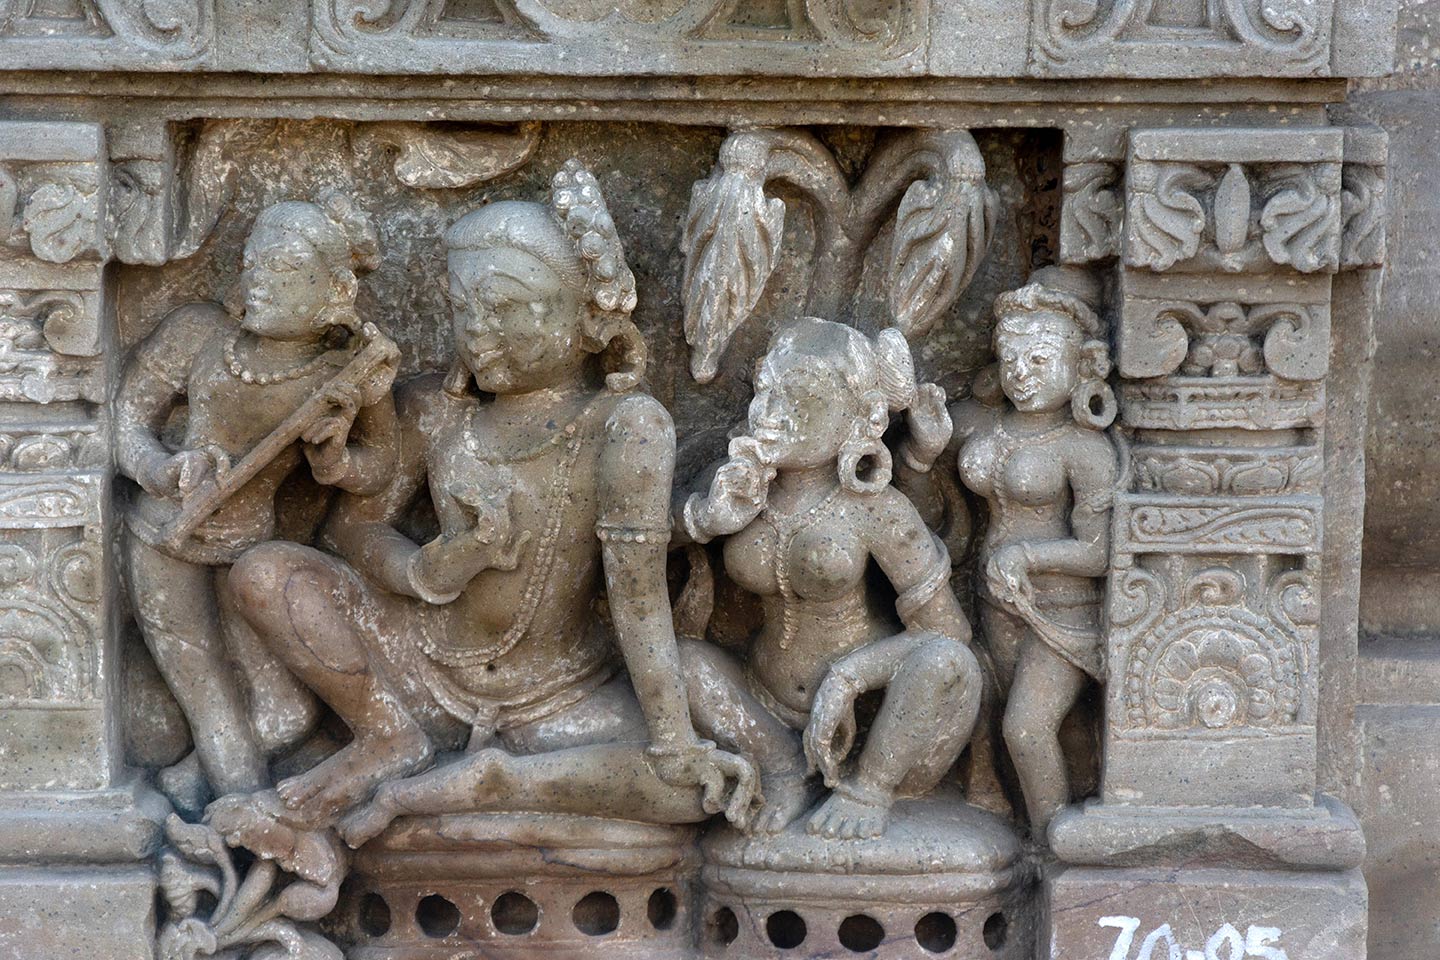 The central male figure is seated in the rajalilasana pose (both legs raised on the seat, palm of the feet together) on a raised seat. The central female figure is seated on the left of the man, on a separate seat, in the malasana (squat) pose. Male and female attendants flank the central figure from the left and right respectively. All the figures are watching a performance (not in the frame) and looking in unison towards the left.